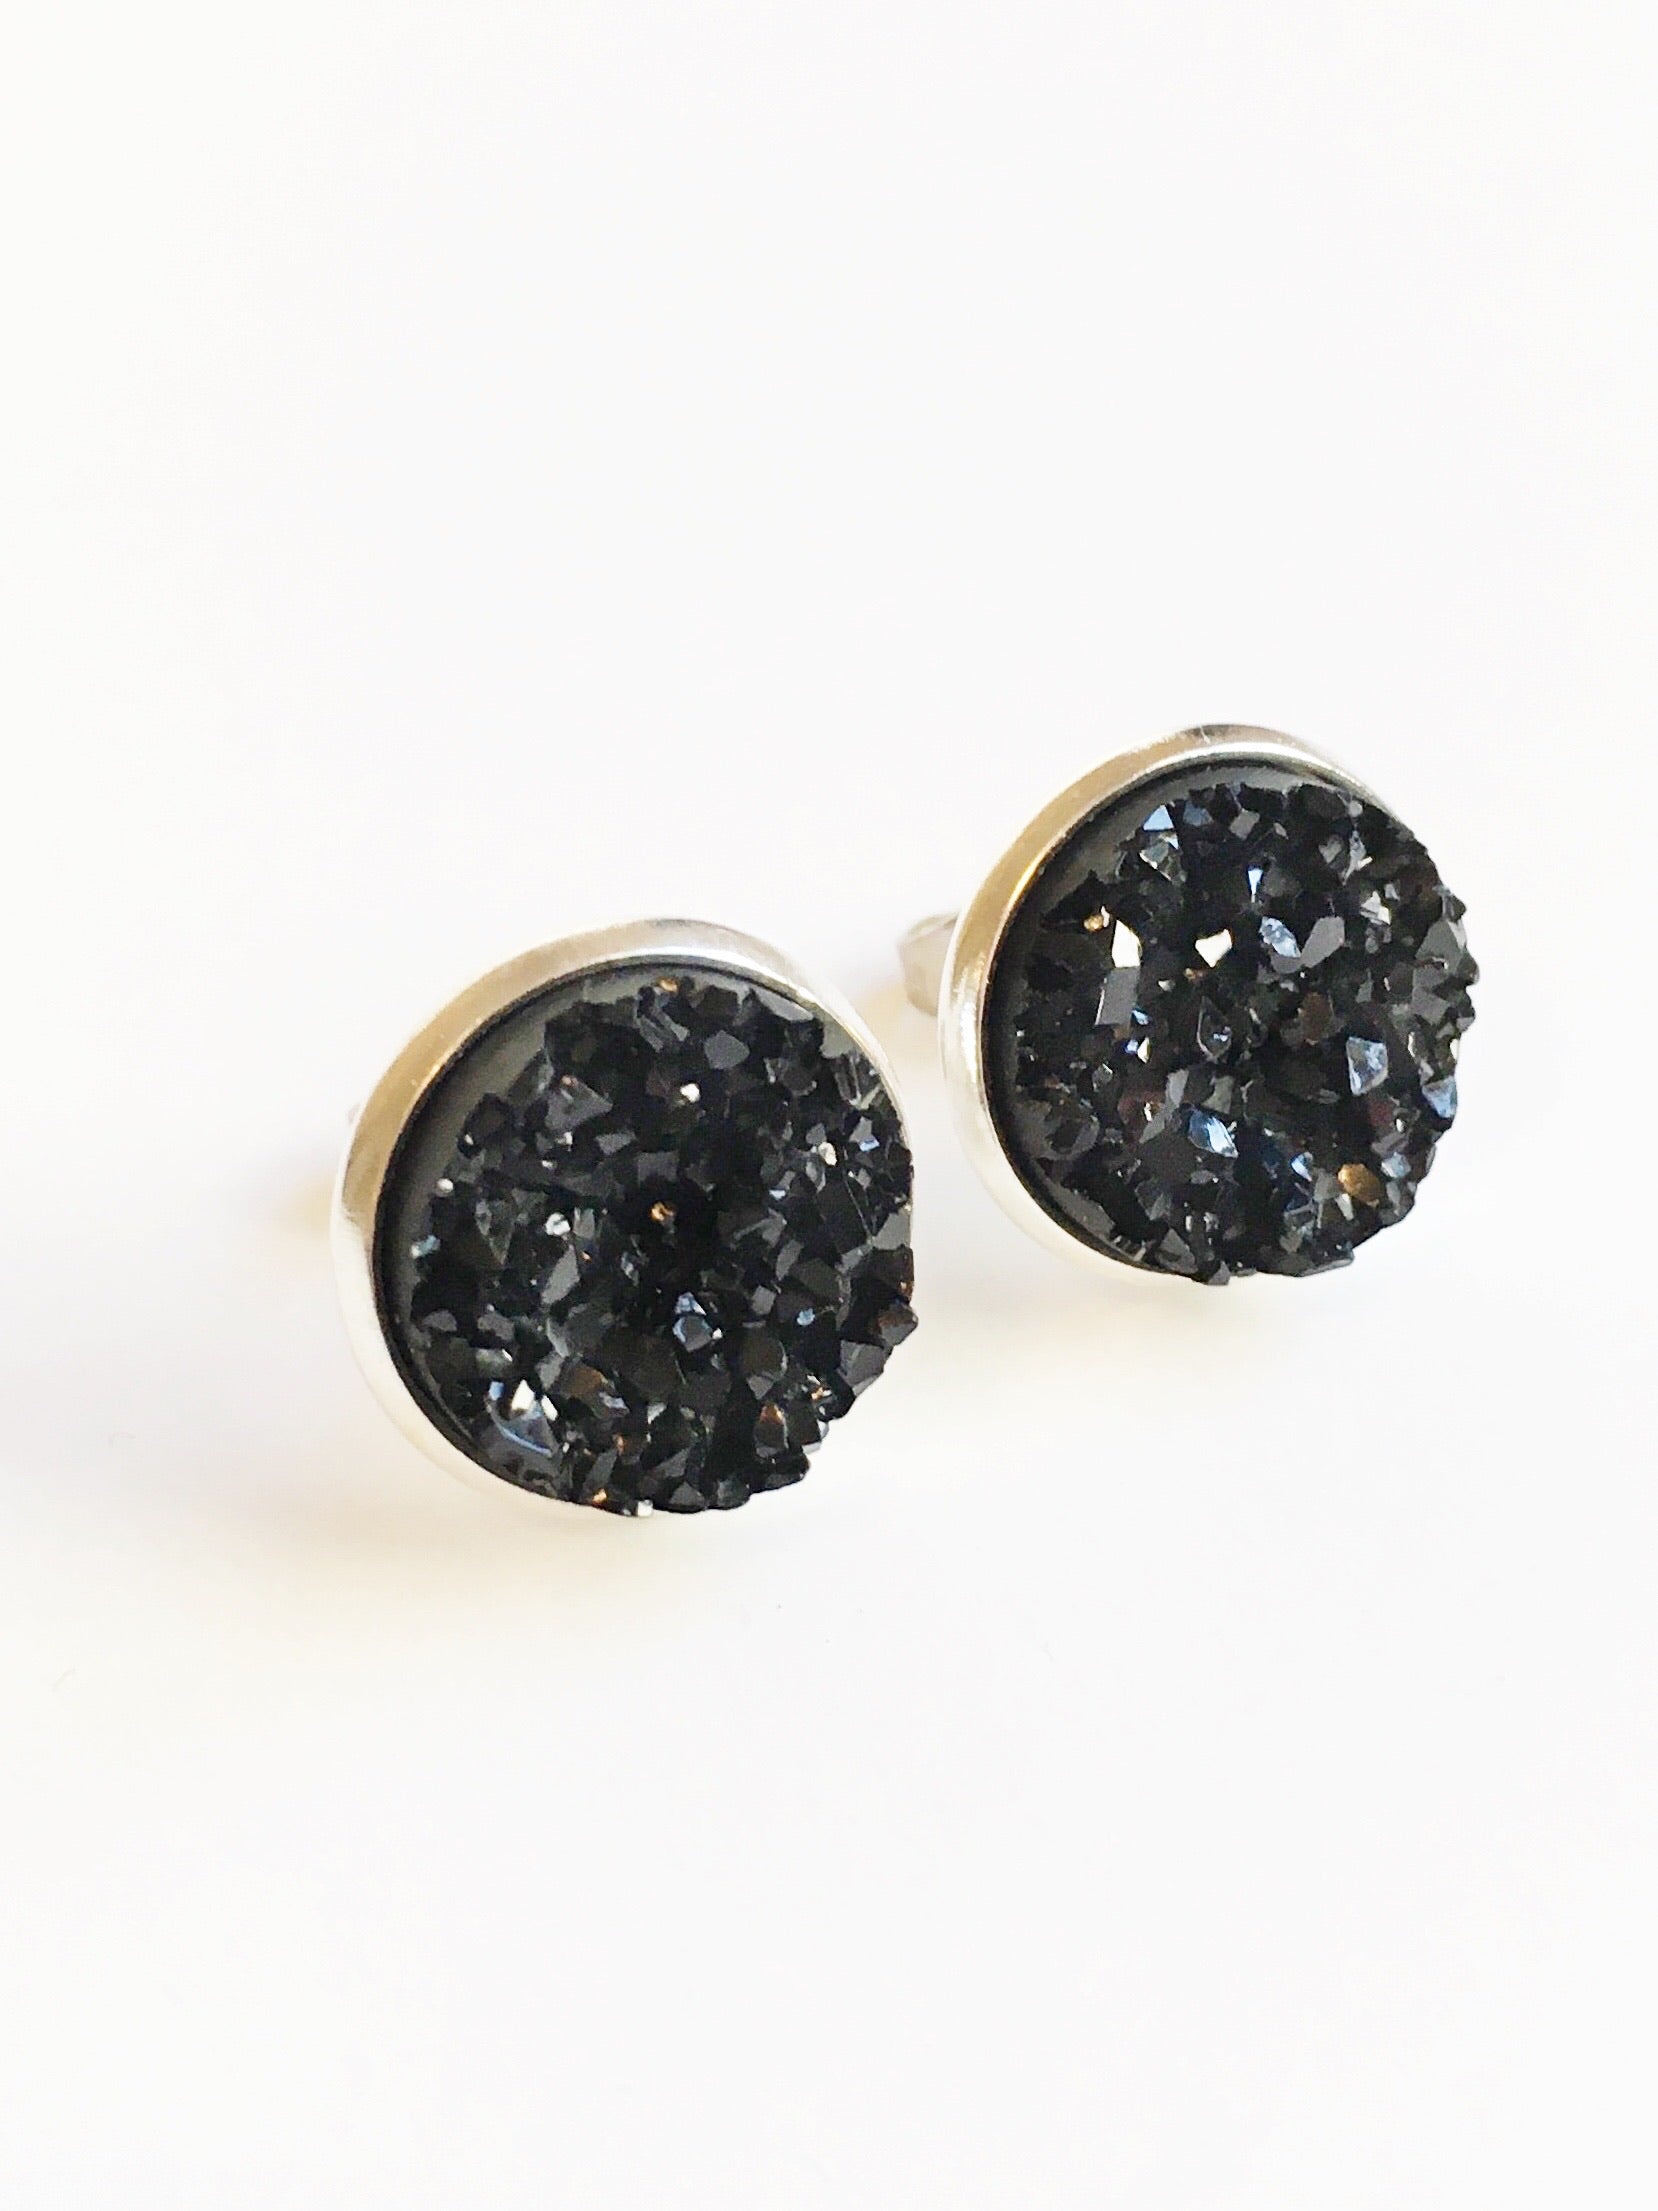 Black resin druzy stone stud earrings set in a silver color setting. 